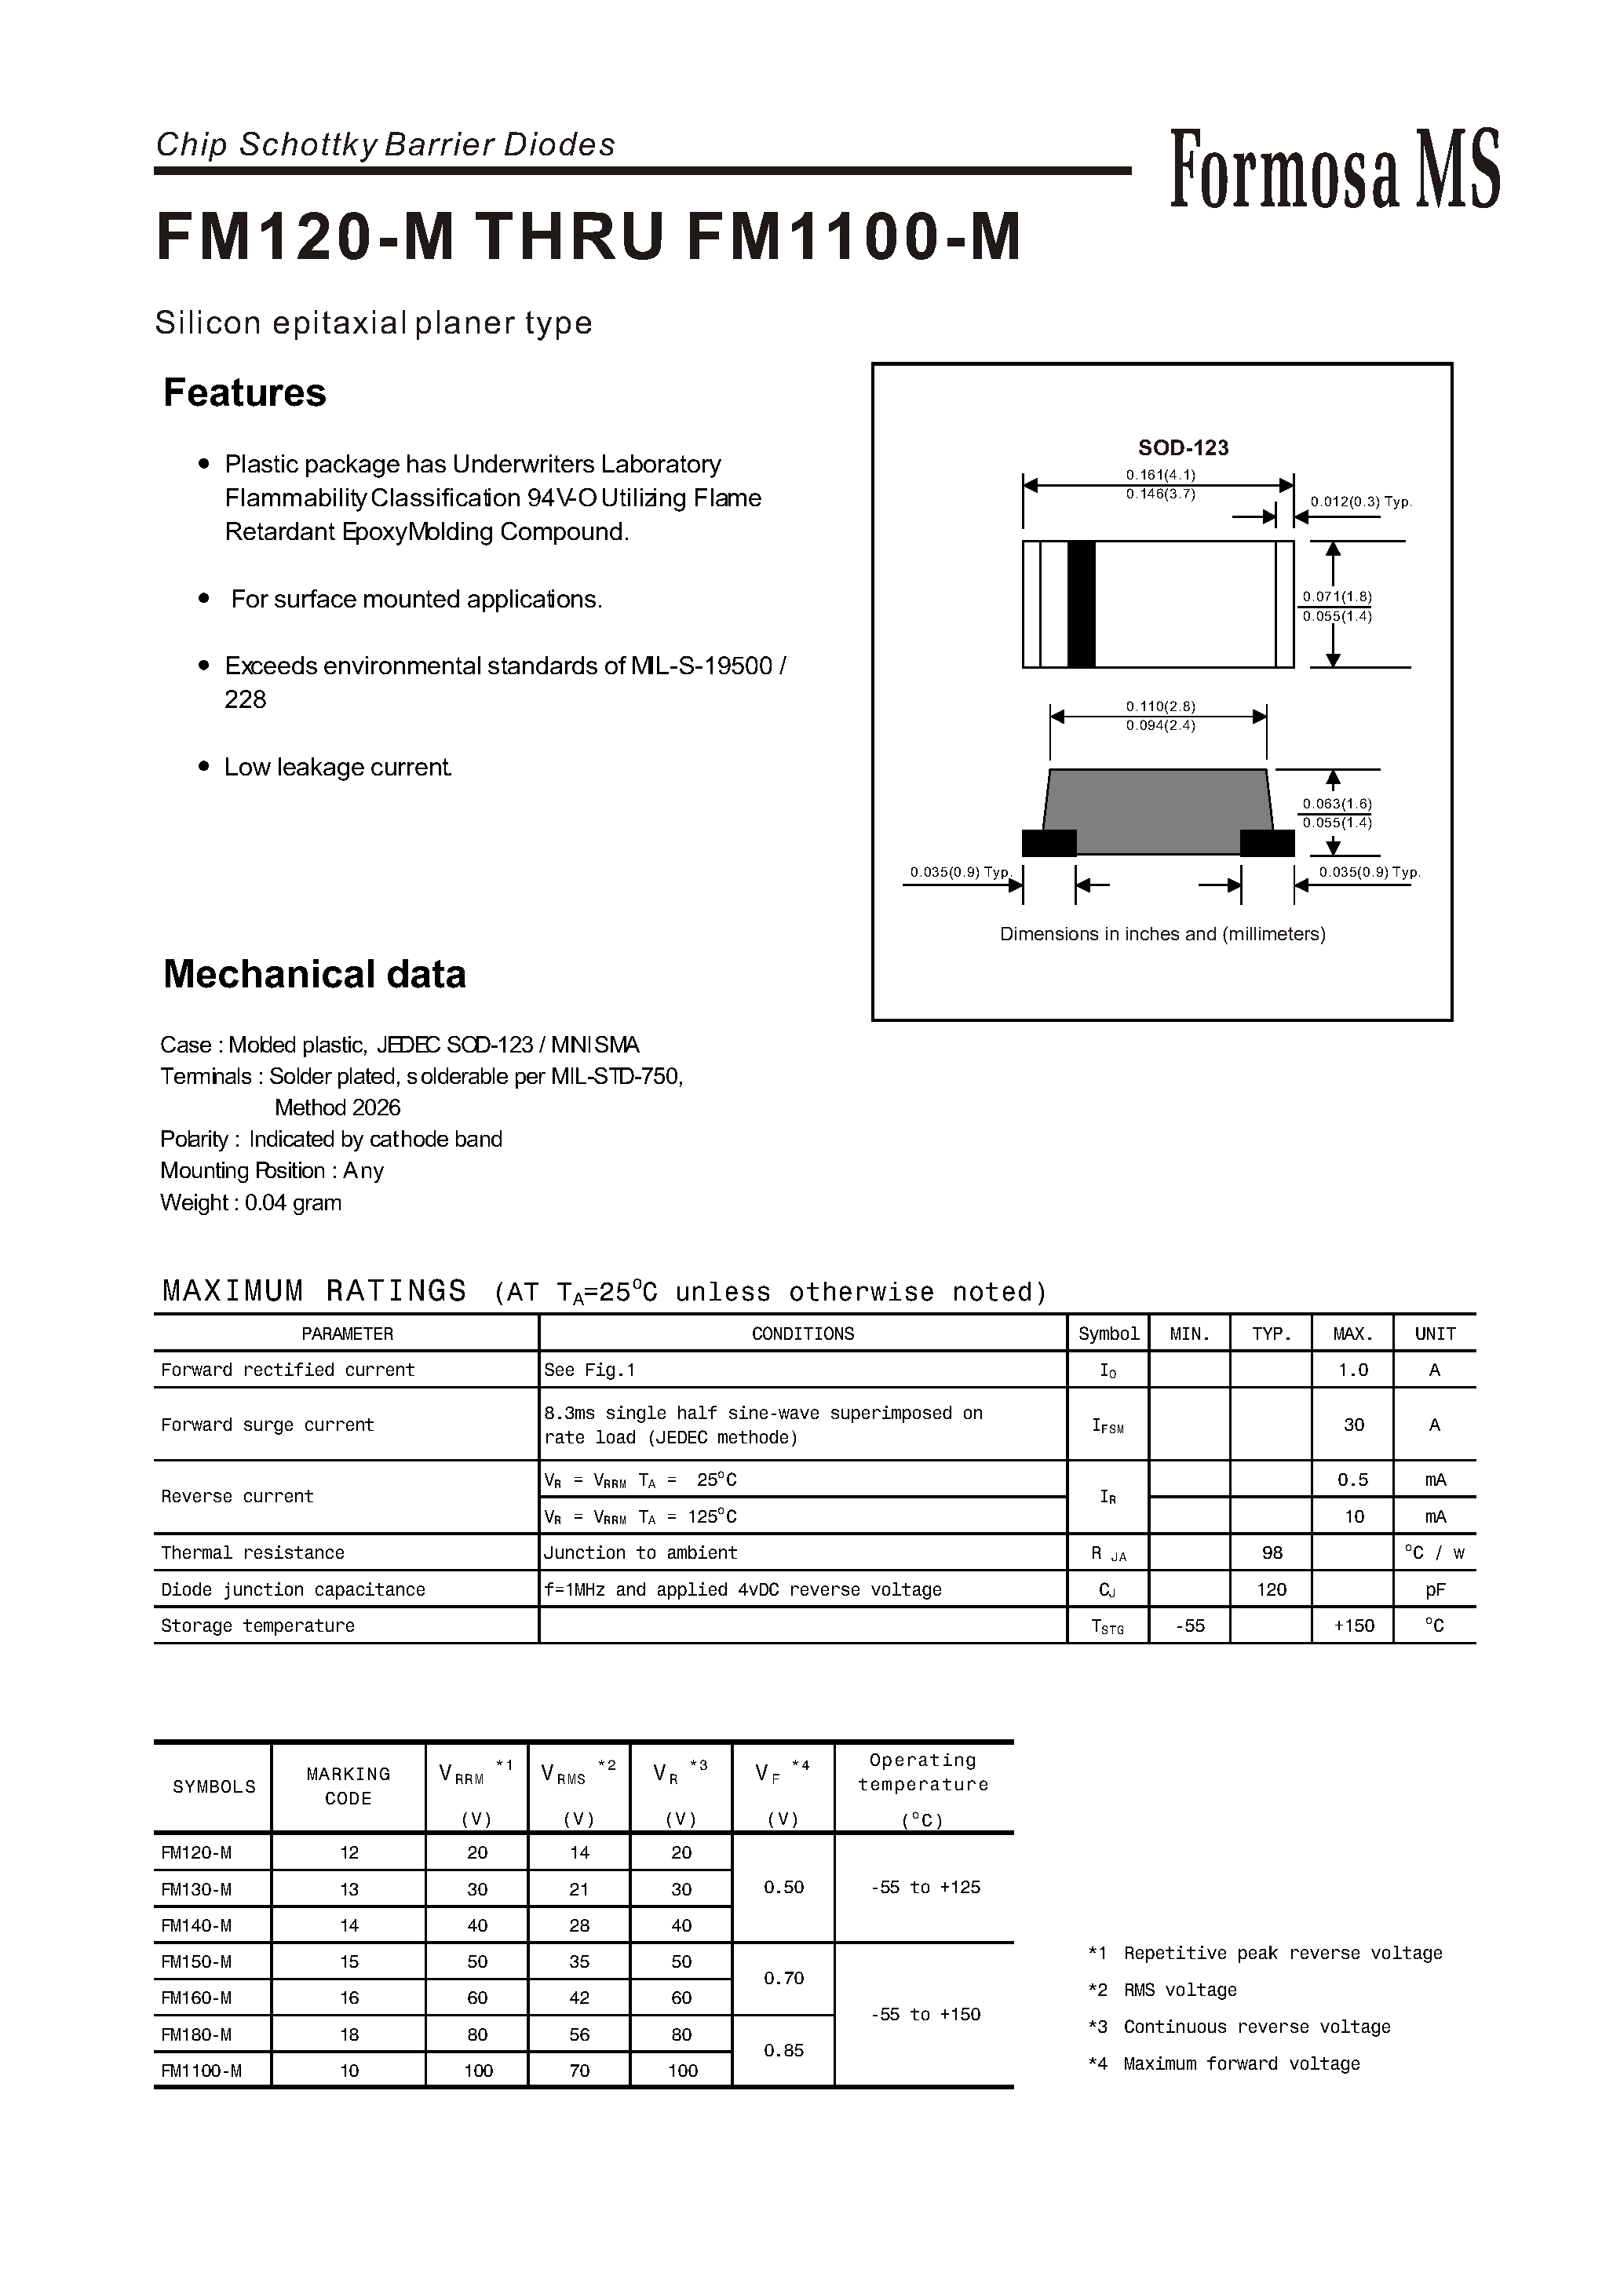 Datasheet FM180-M - Silicon epitaxial planer type page 1